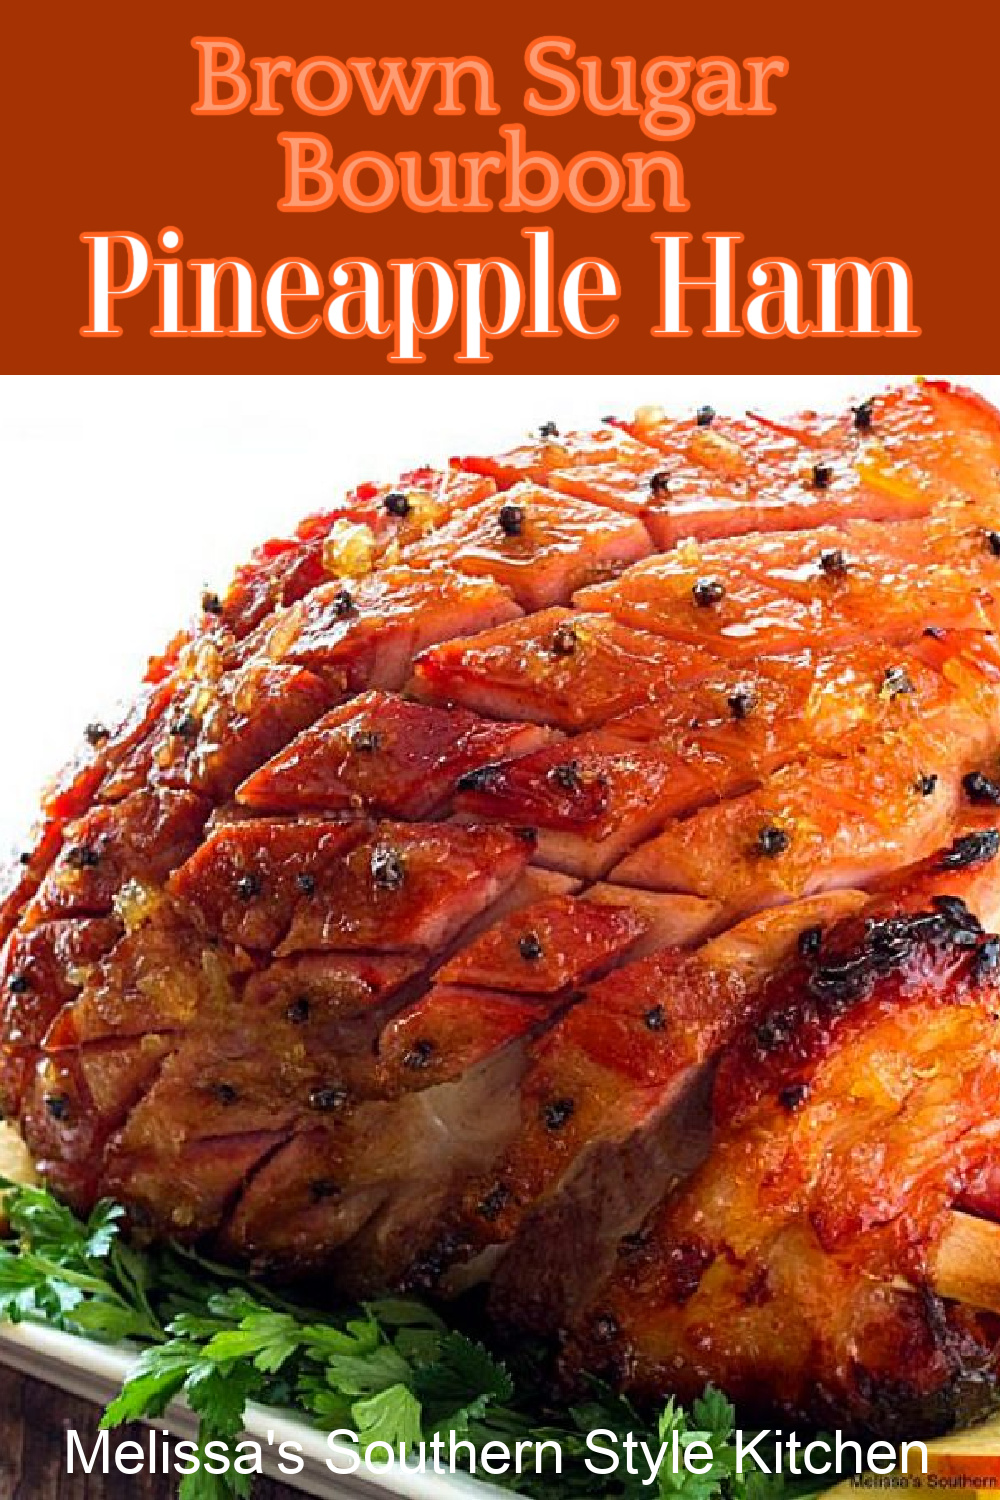 Brown Sugar Bourbon Pineapple Glazed Ham is the perfect centerpiece for your holiday table #brownsugarham #hamrecipes #southernham #bakedhamrecipes #brownsugarhamrecipe #borubonglazedham #easterrecipes #christmasrecipes #thanksgivingrecipes #glazedham #southernrecipes #southernfood #melissassouthernstylekitchen